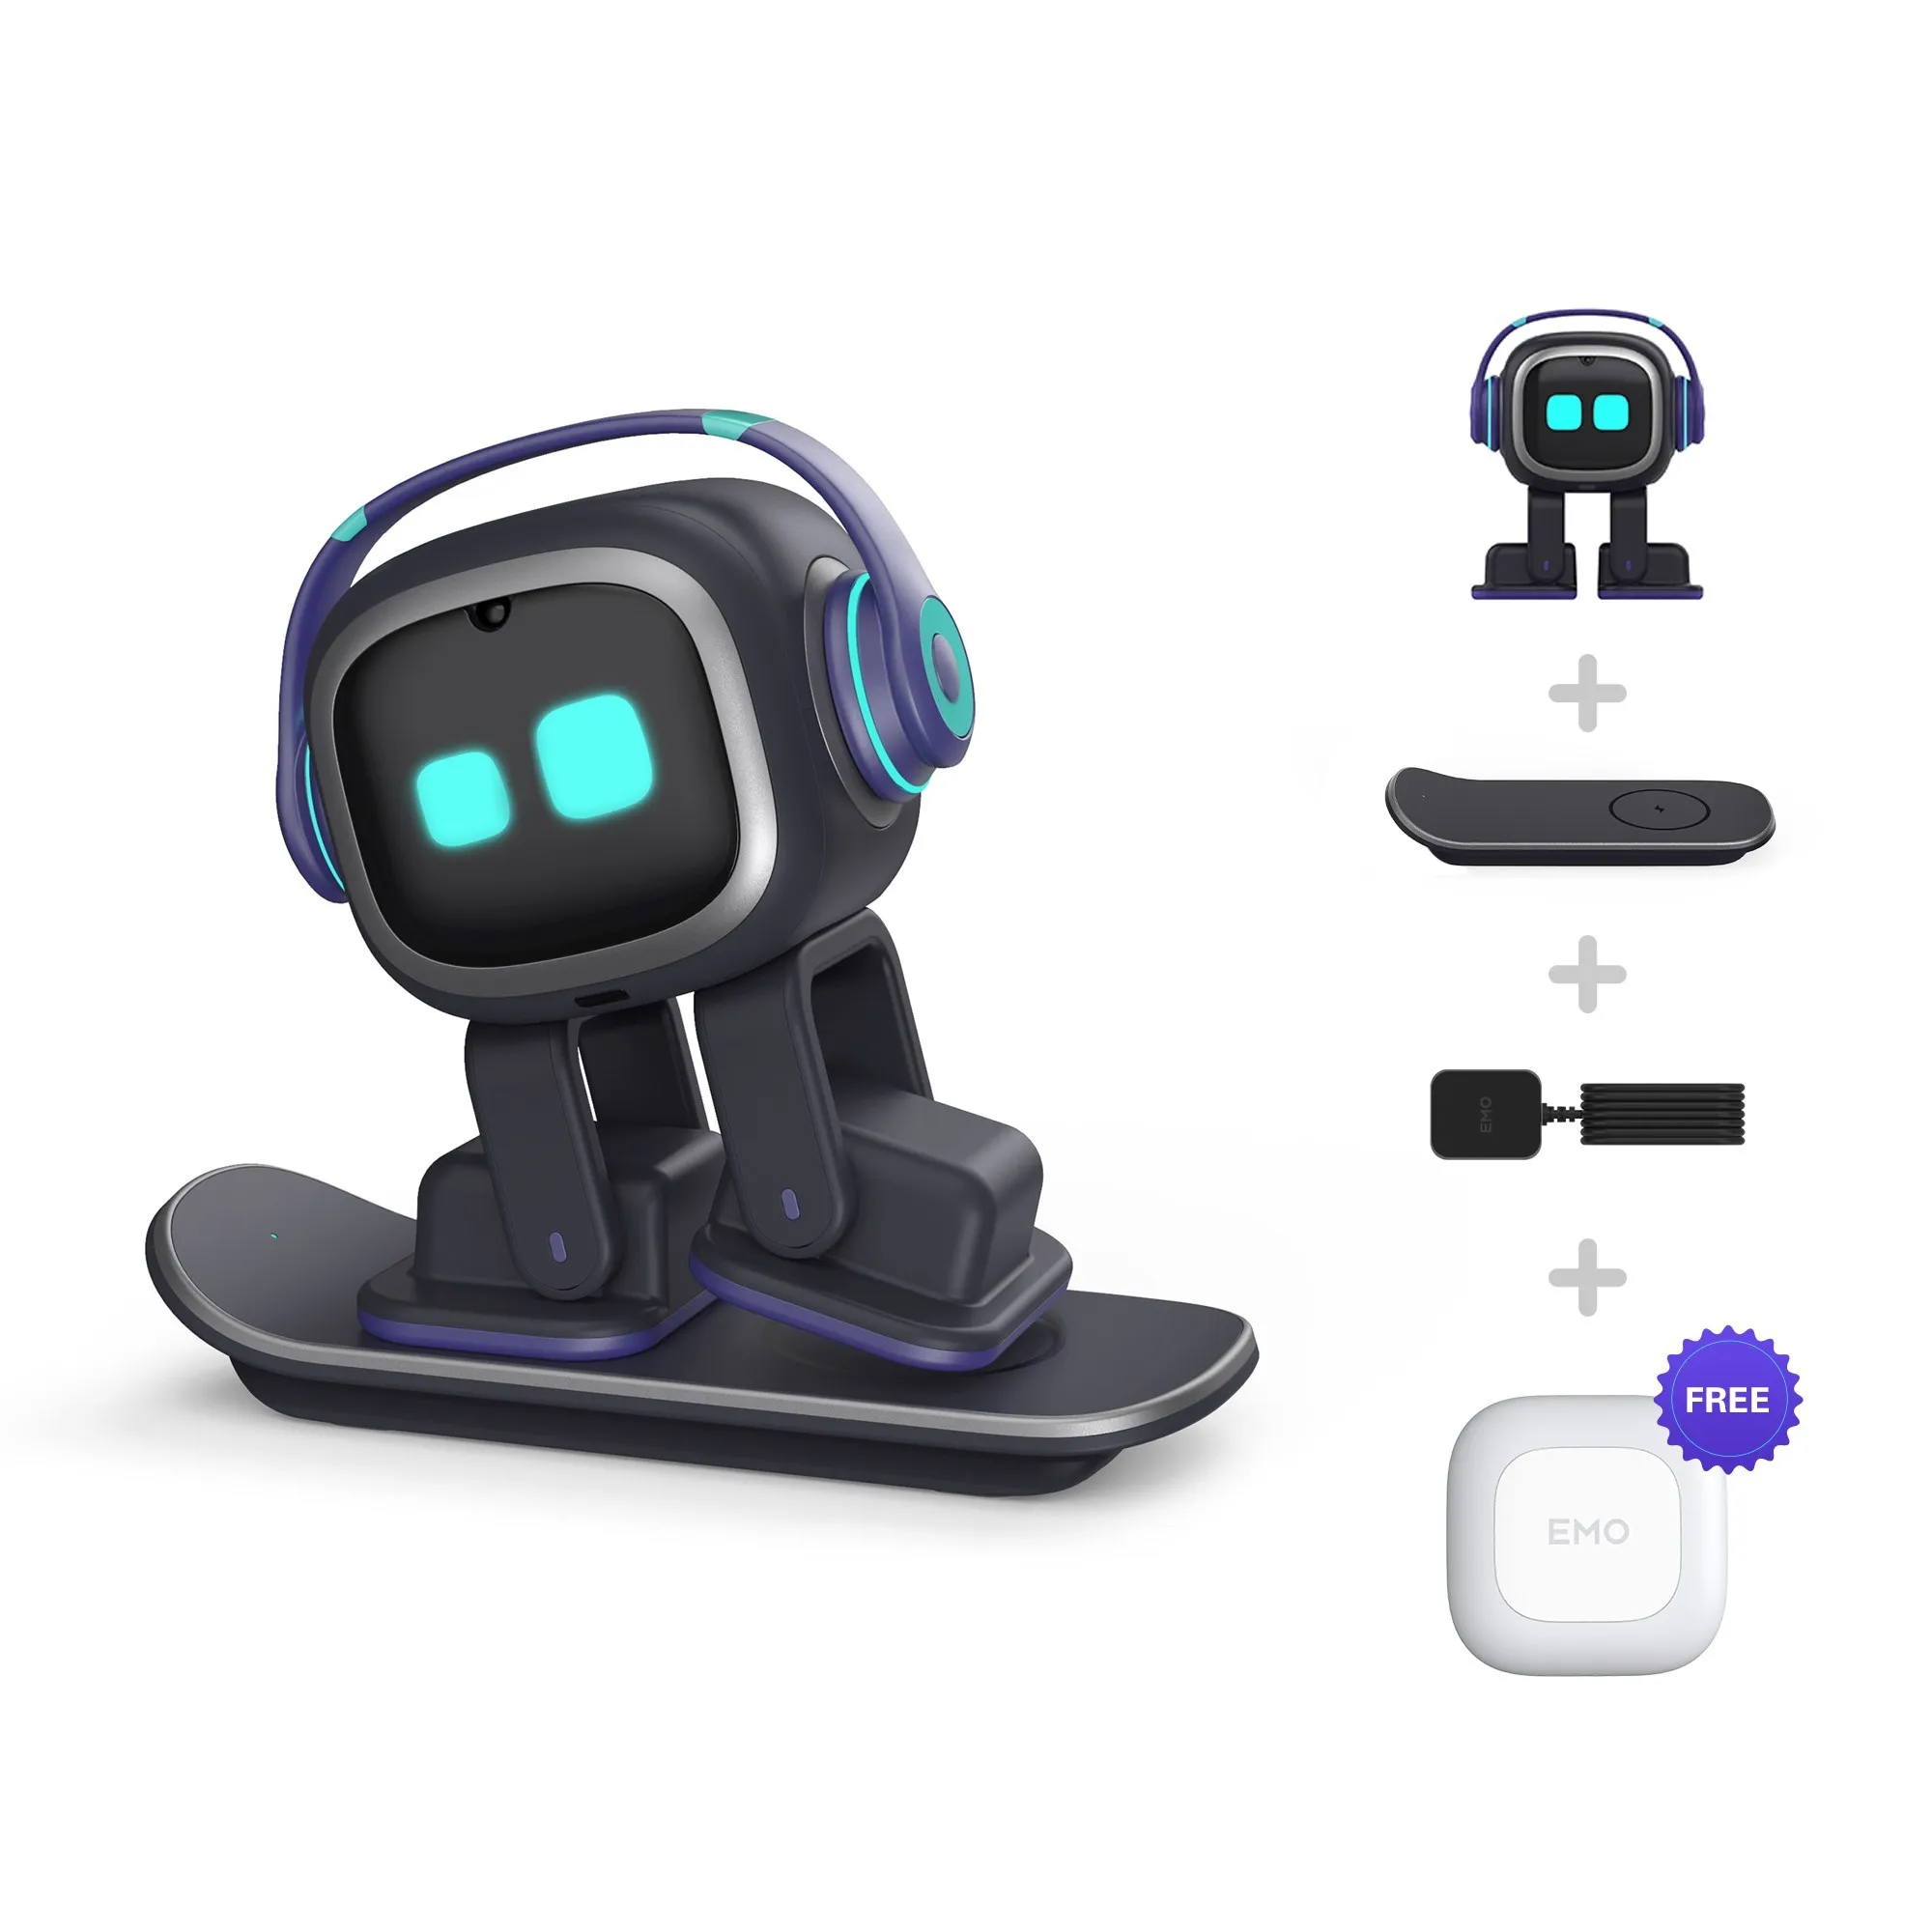 EMO electric toy robot anki vector robot AI intelligent voice chat electronic _ - AliExpress Mobile